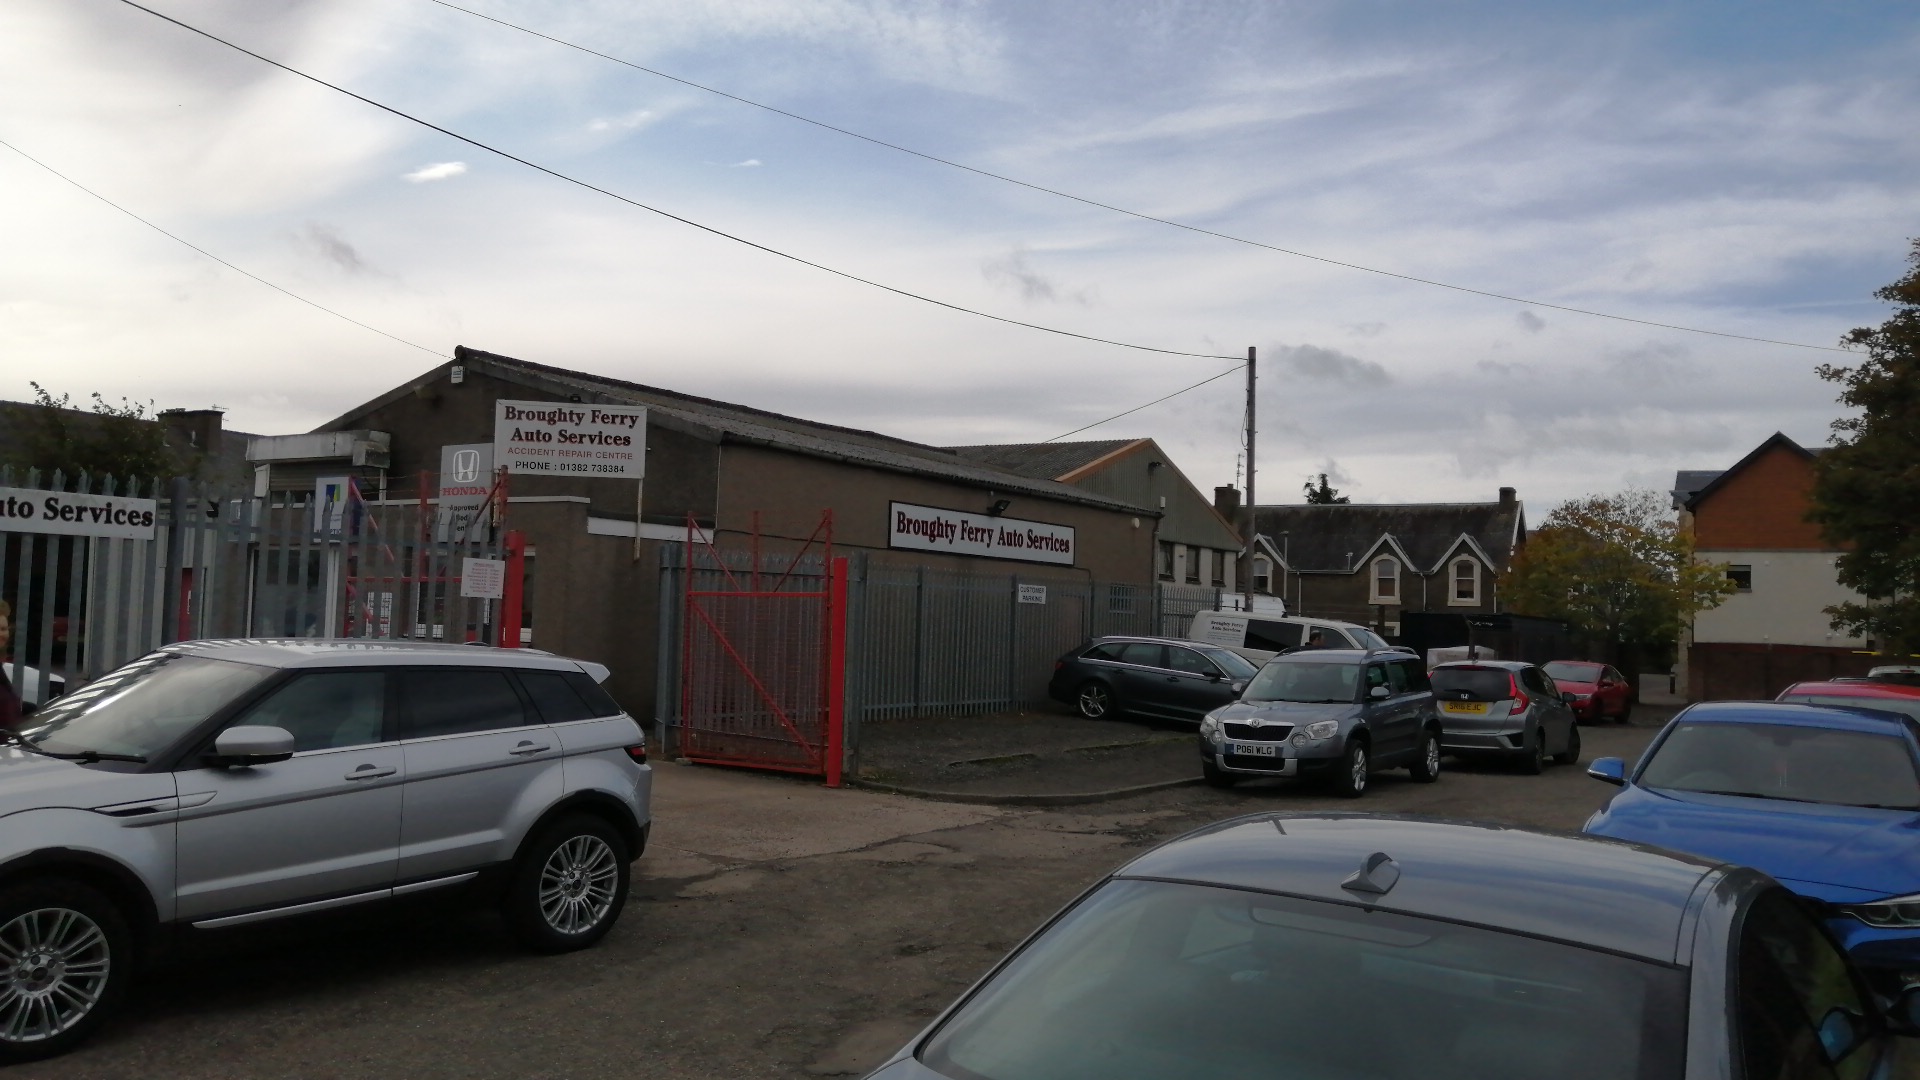 Broughty Ferry Auto Services